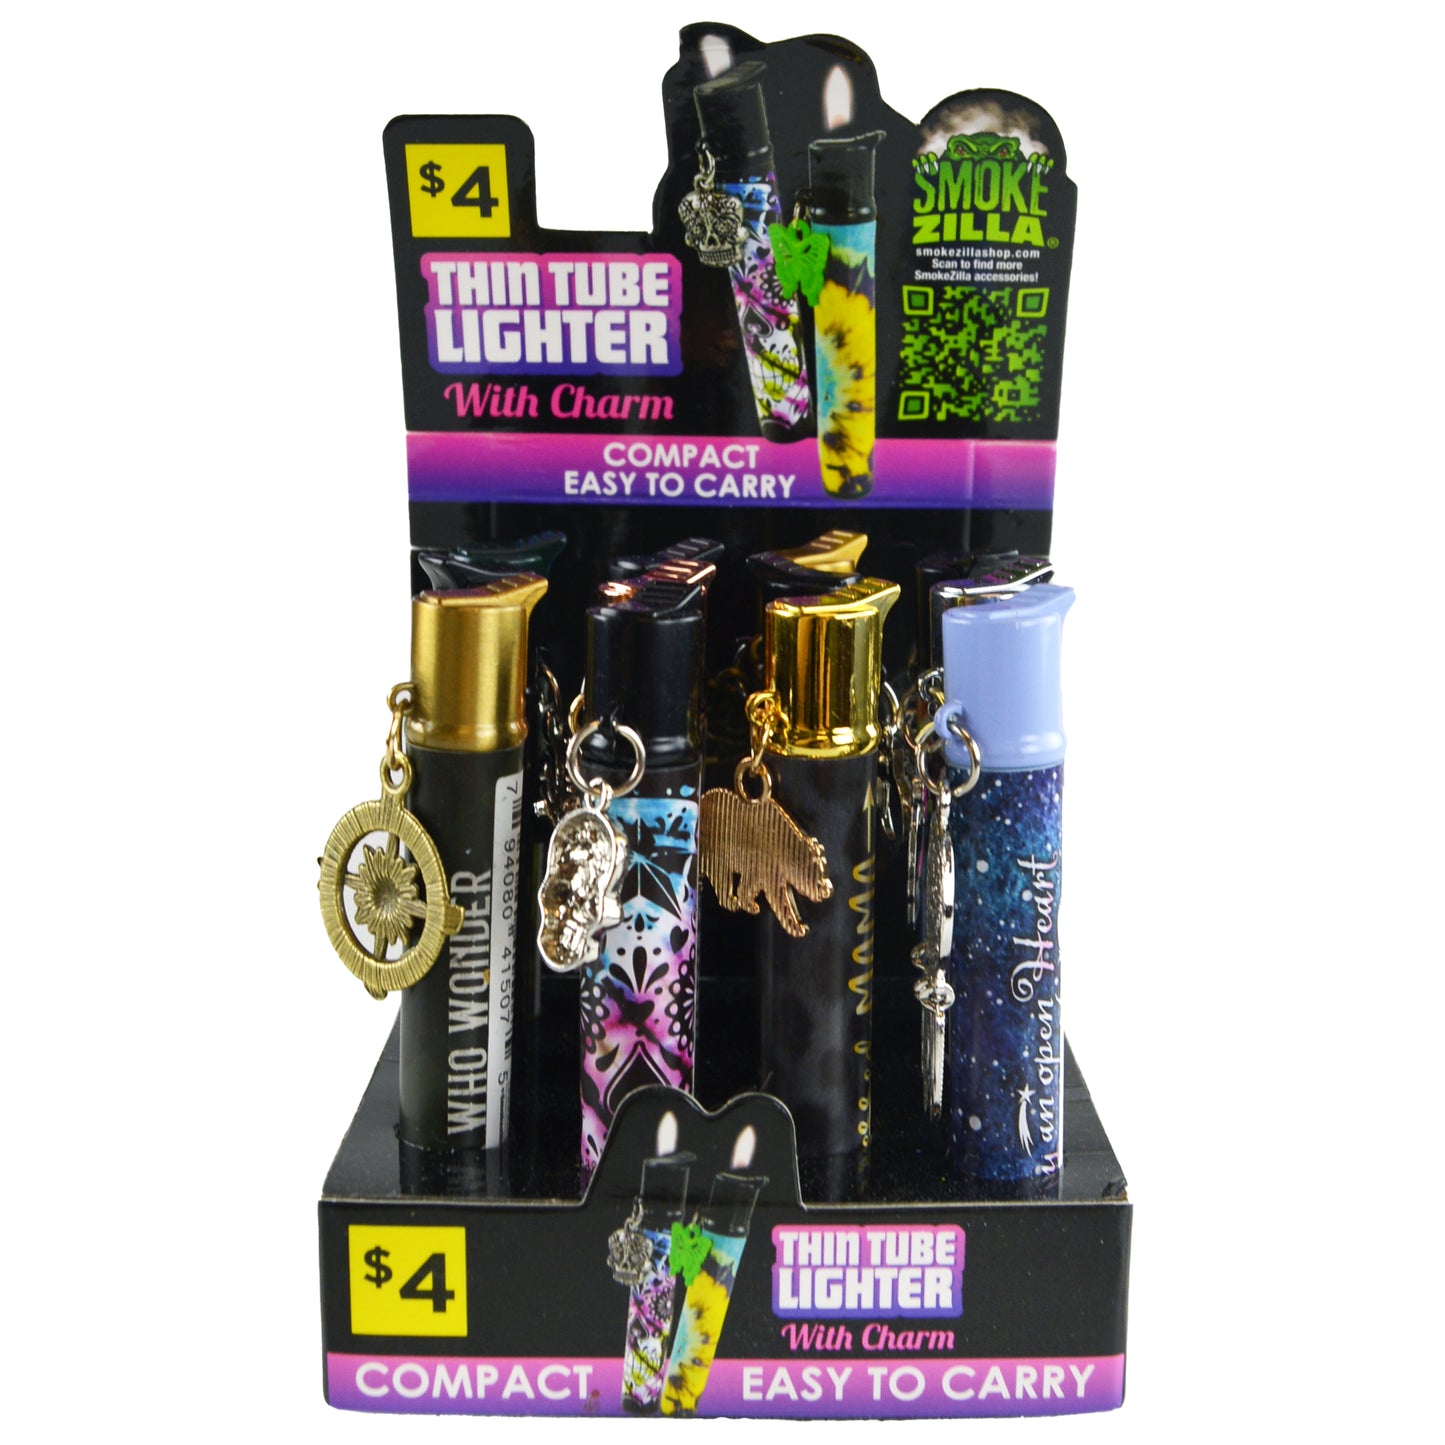 ITEM NUMBER 041507 THIN TUBE LIGHTER W/ CHARM 12 PIECES PER DISPLAY